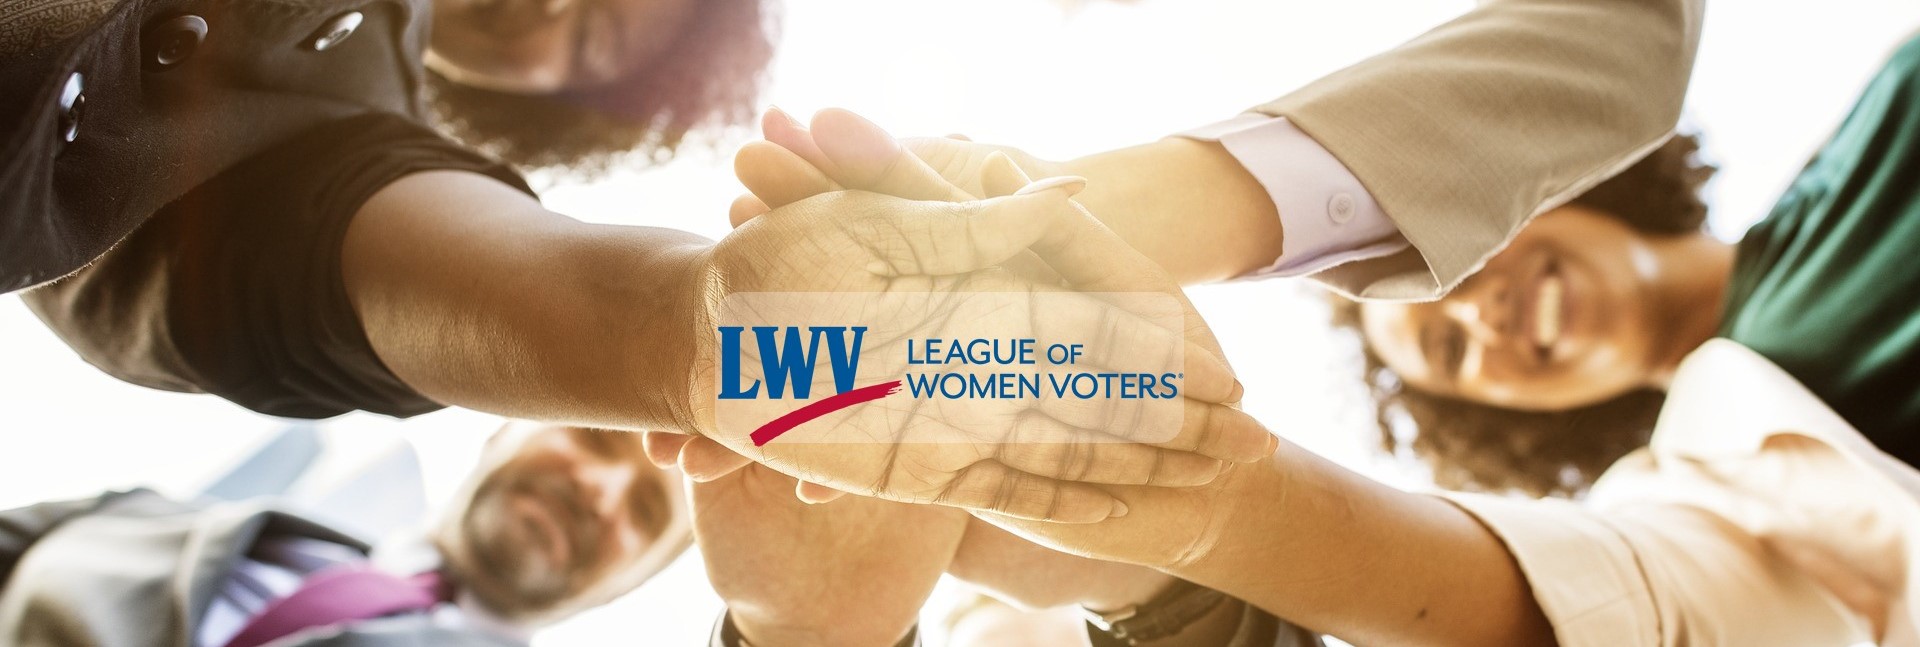 League of Women Voters | image of 4 people extending arms, hands stacked